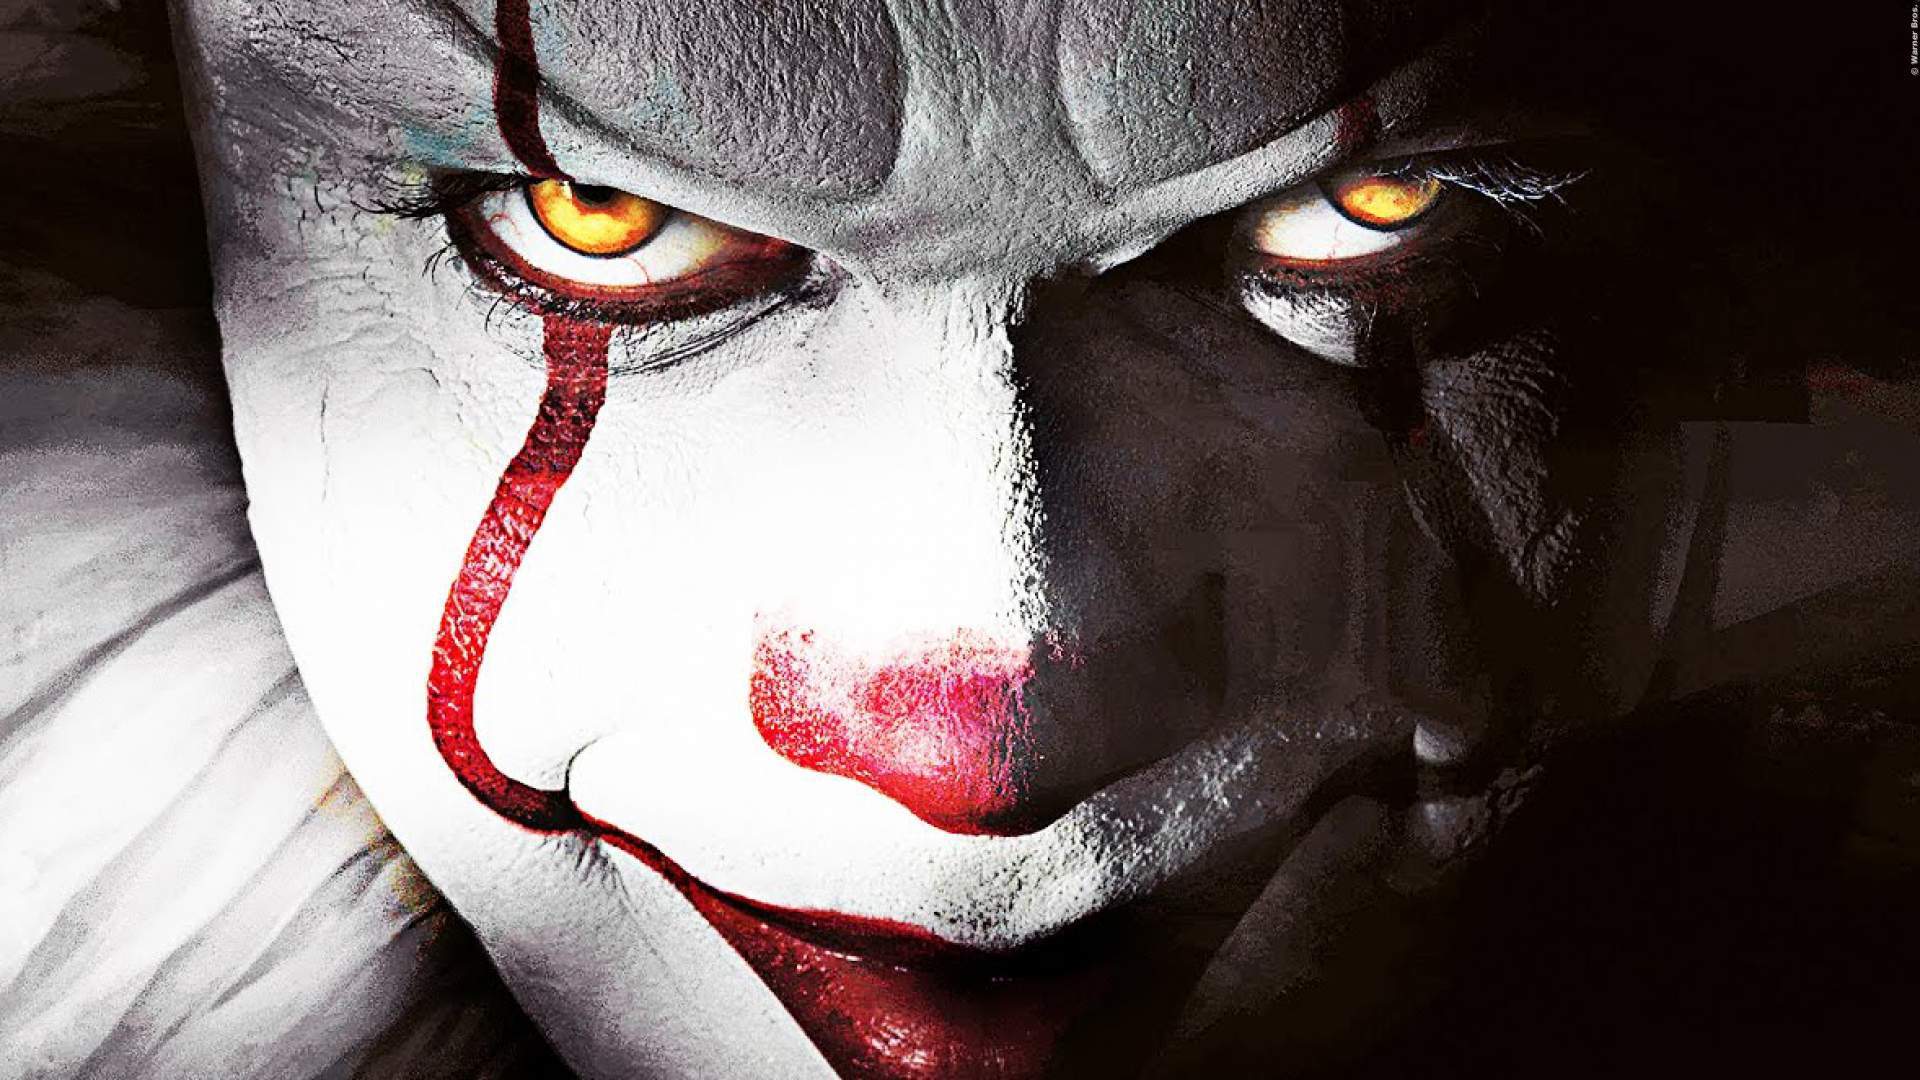 Pennywise Wallpapers on WallpaperDog